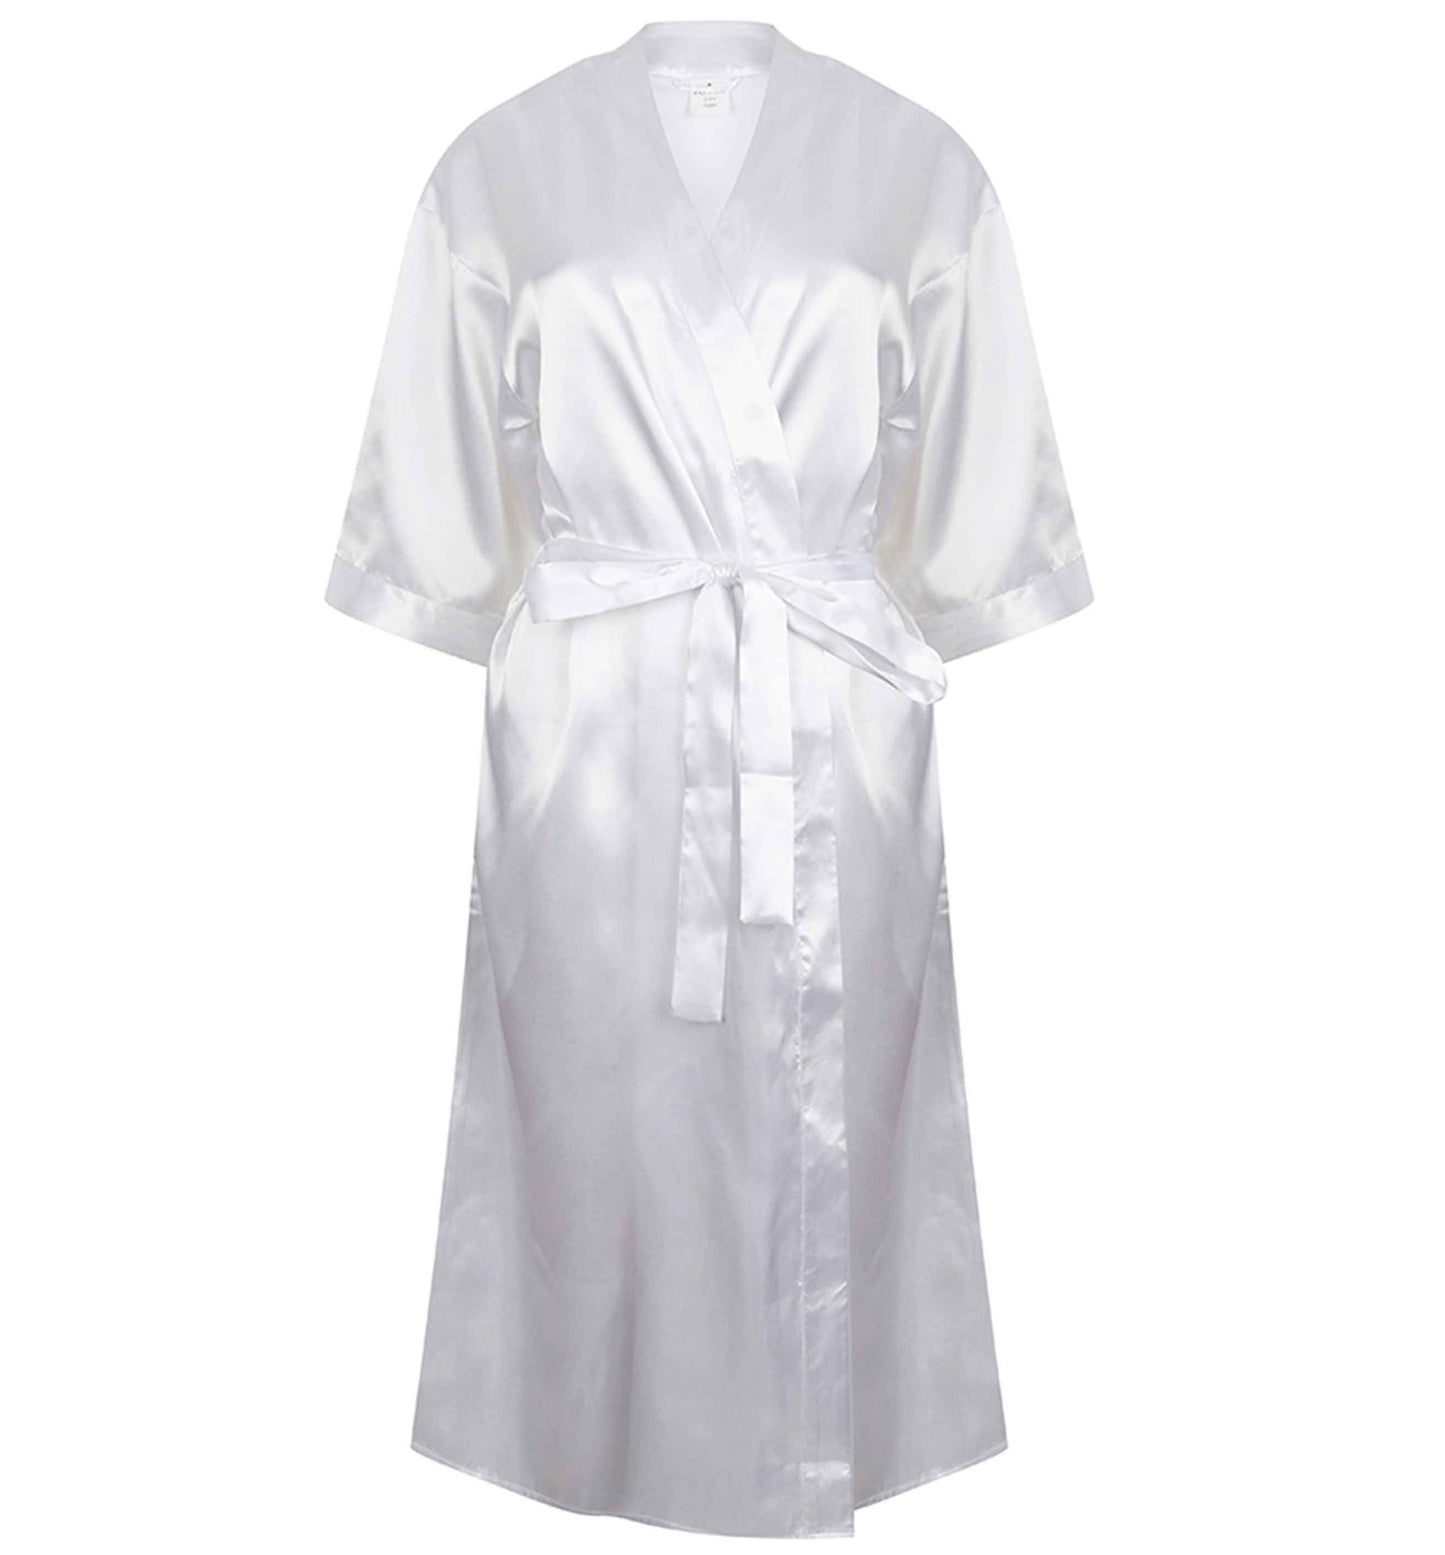 All I want for Christmas is a pug | 8-18 | Kimono style satin robe | Ladies dressing gown